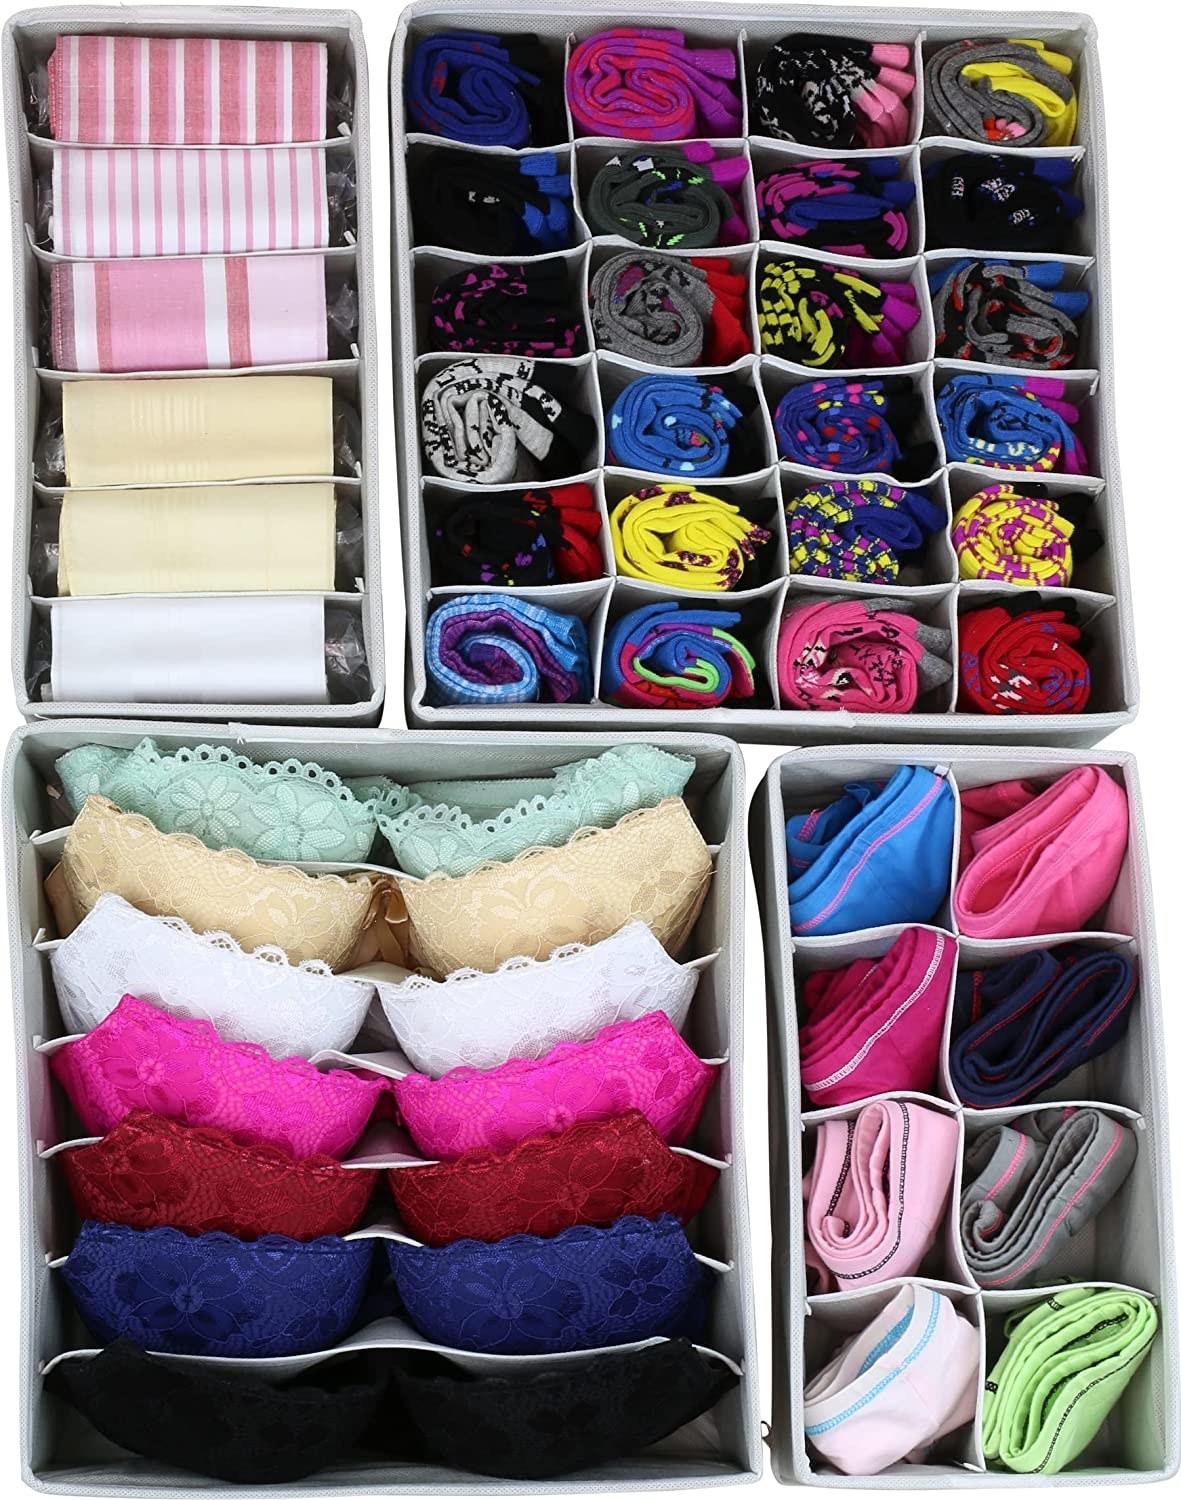 Bras, underwear, and socks all individually organized in the cloth organizers.